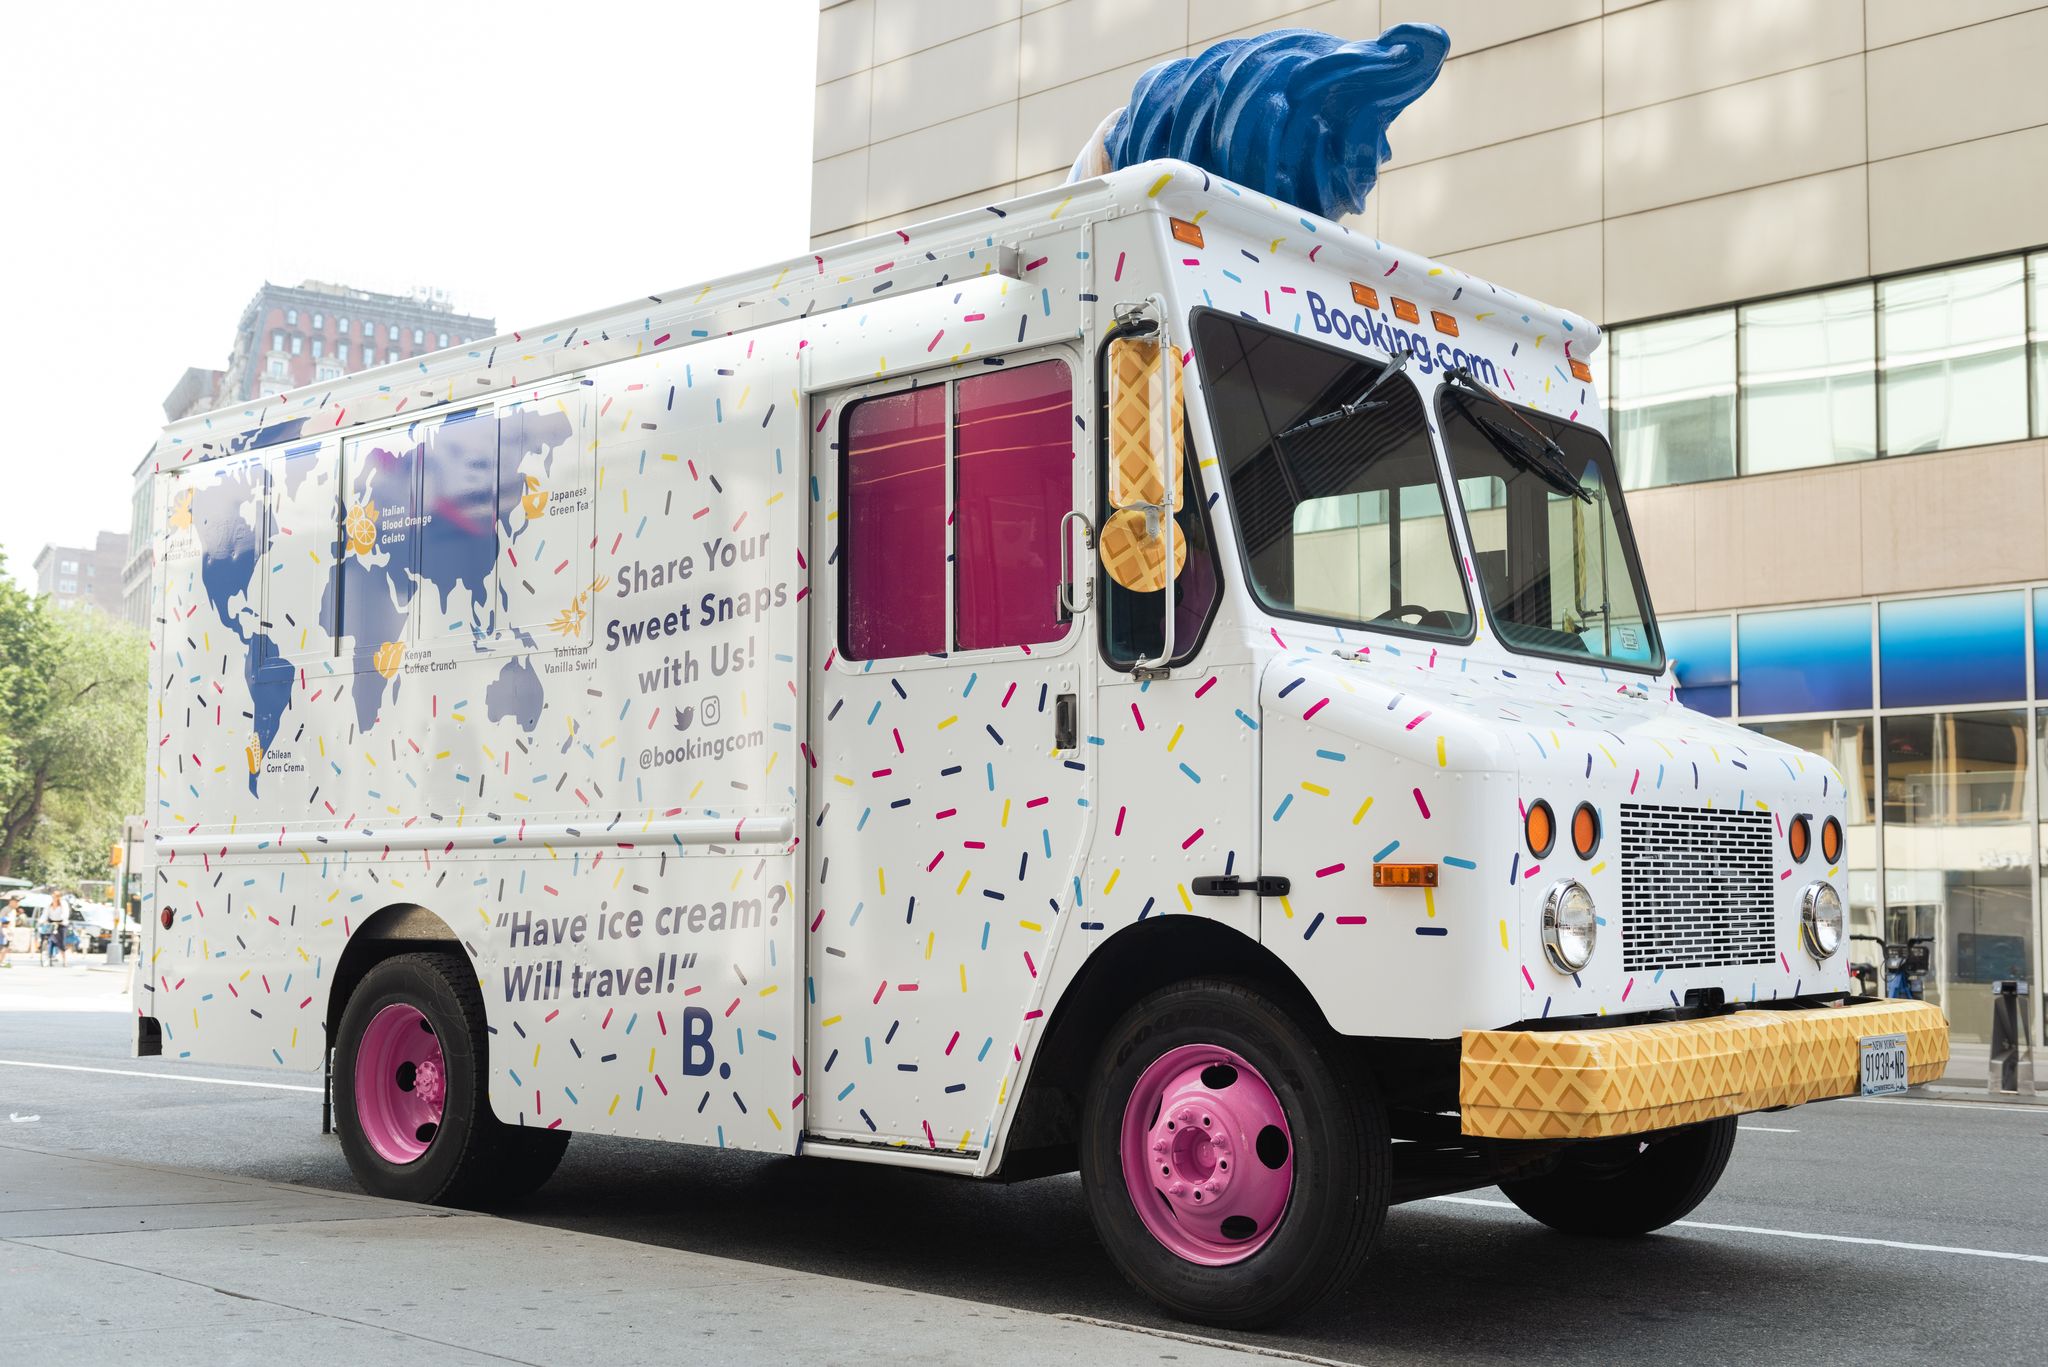 Booking.com Website Summer Promotion With Branded Ice Cream Truck